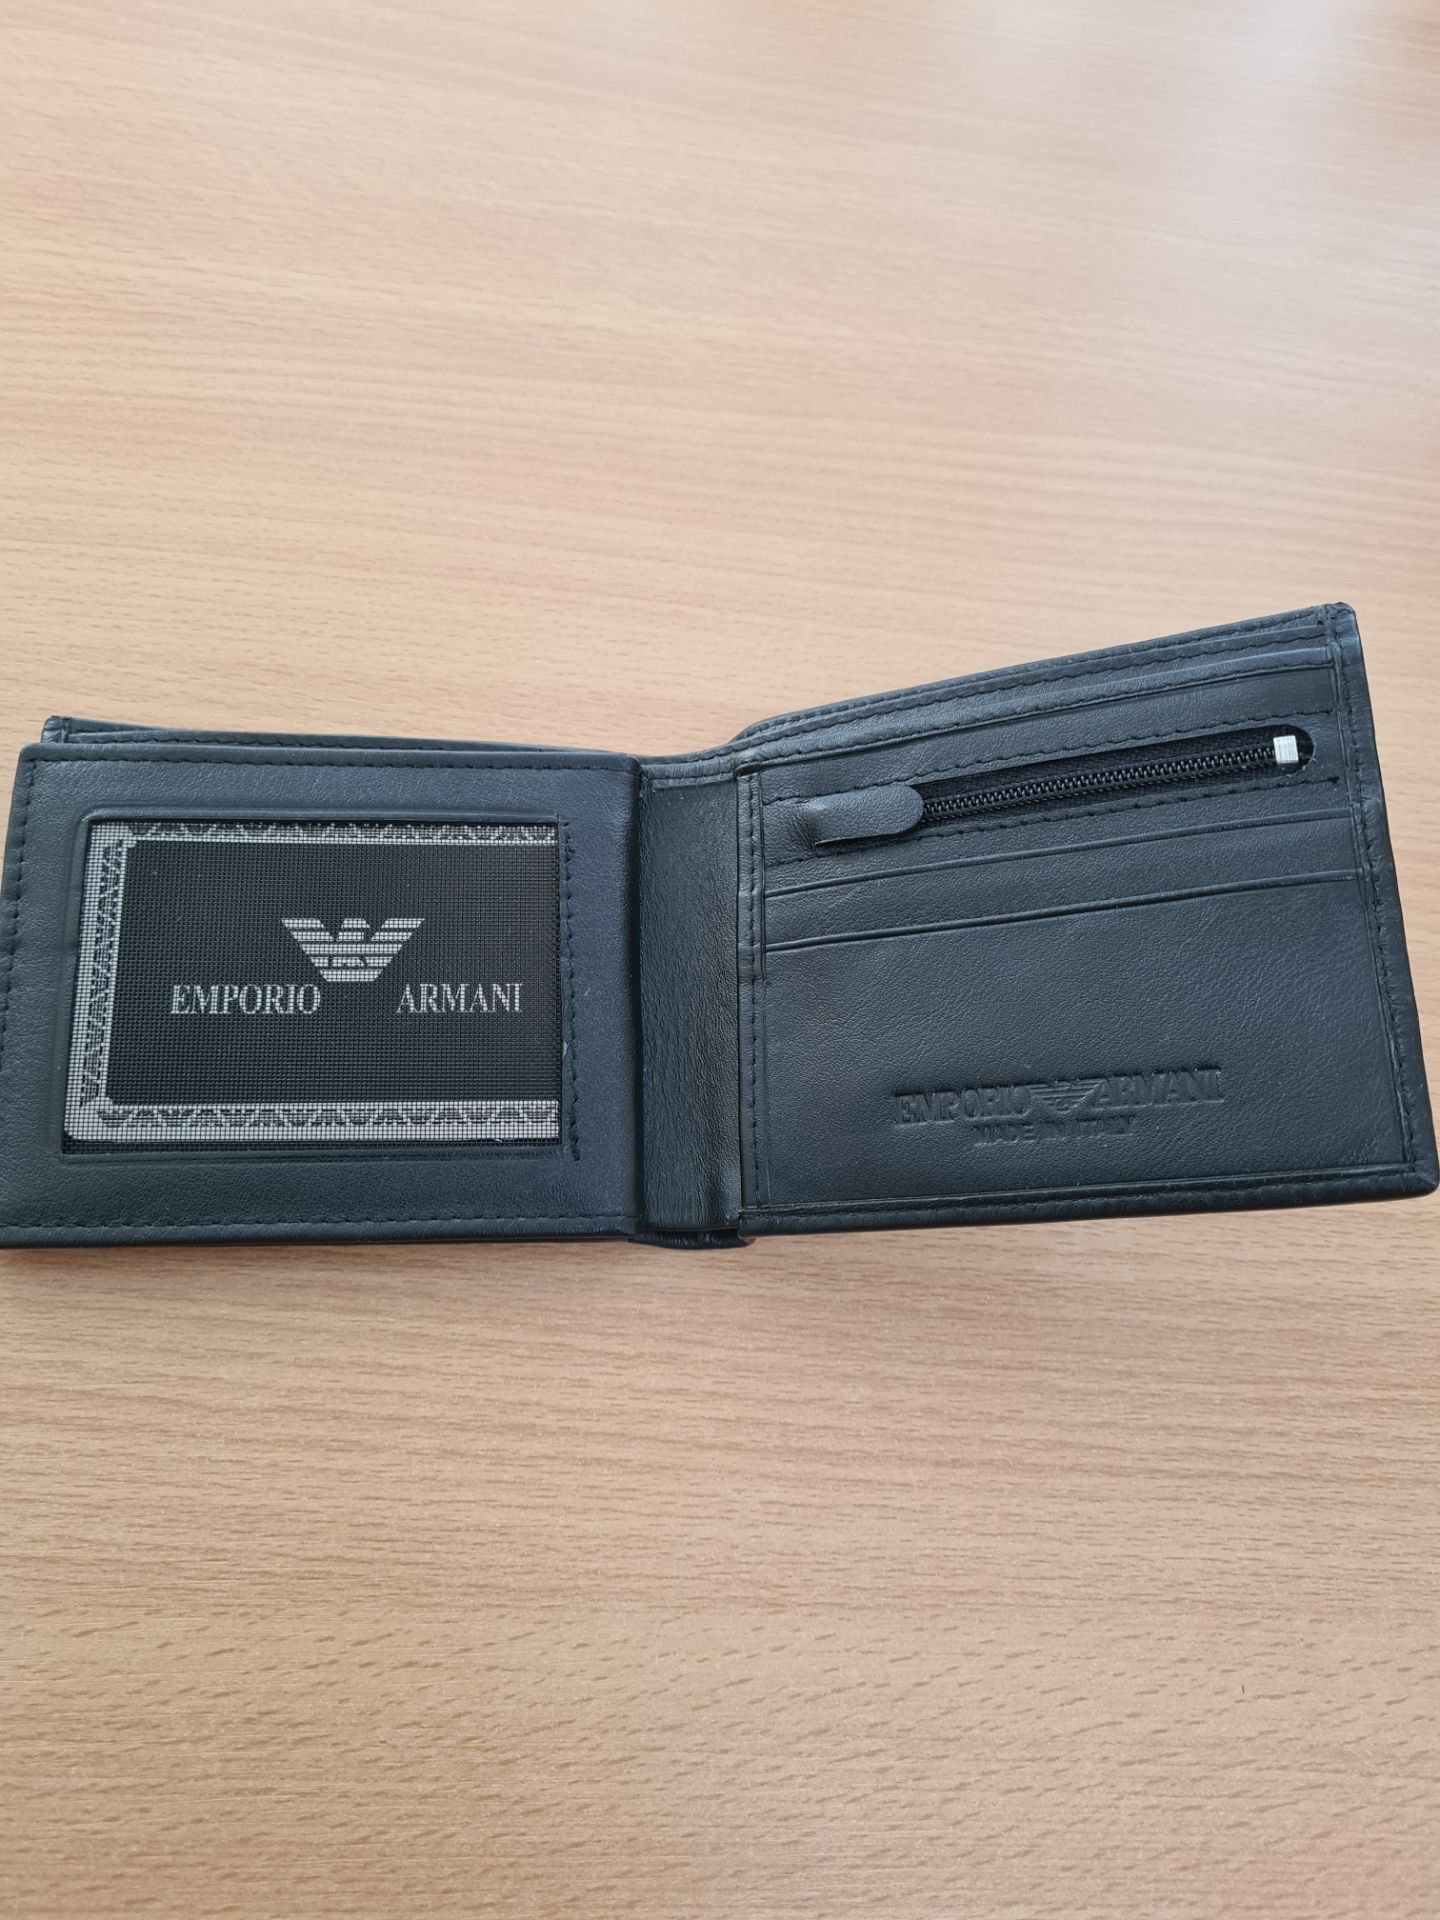 emporio armani men's leather wallet - new with box - Image 3 of 8